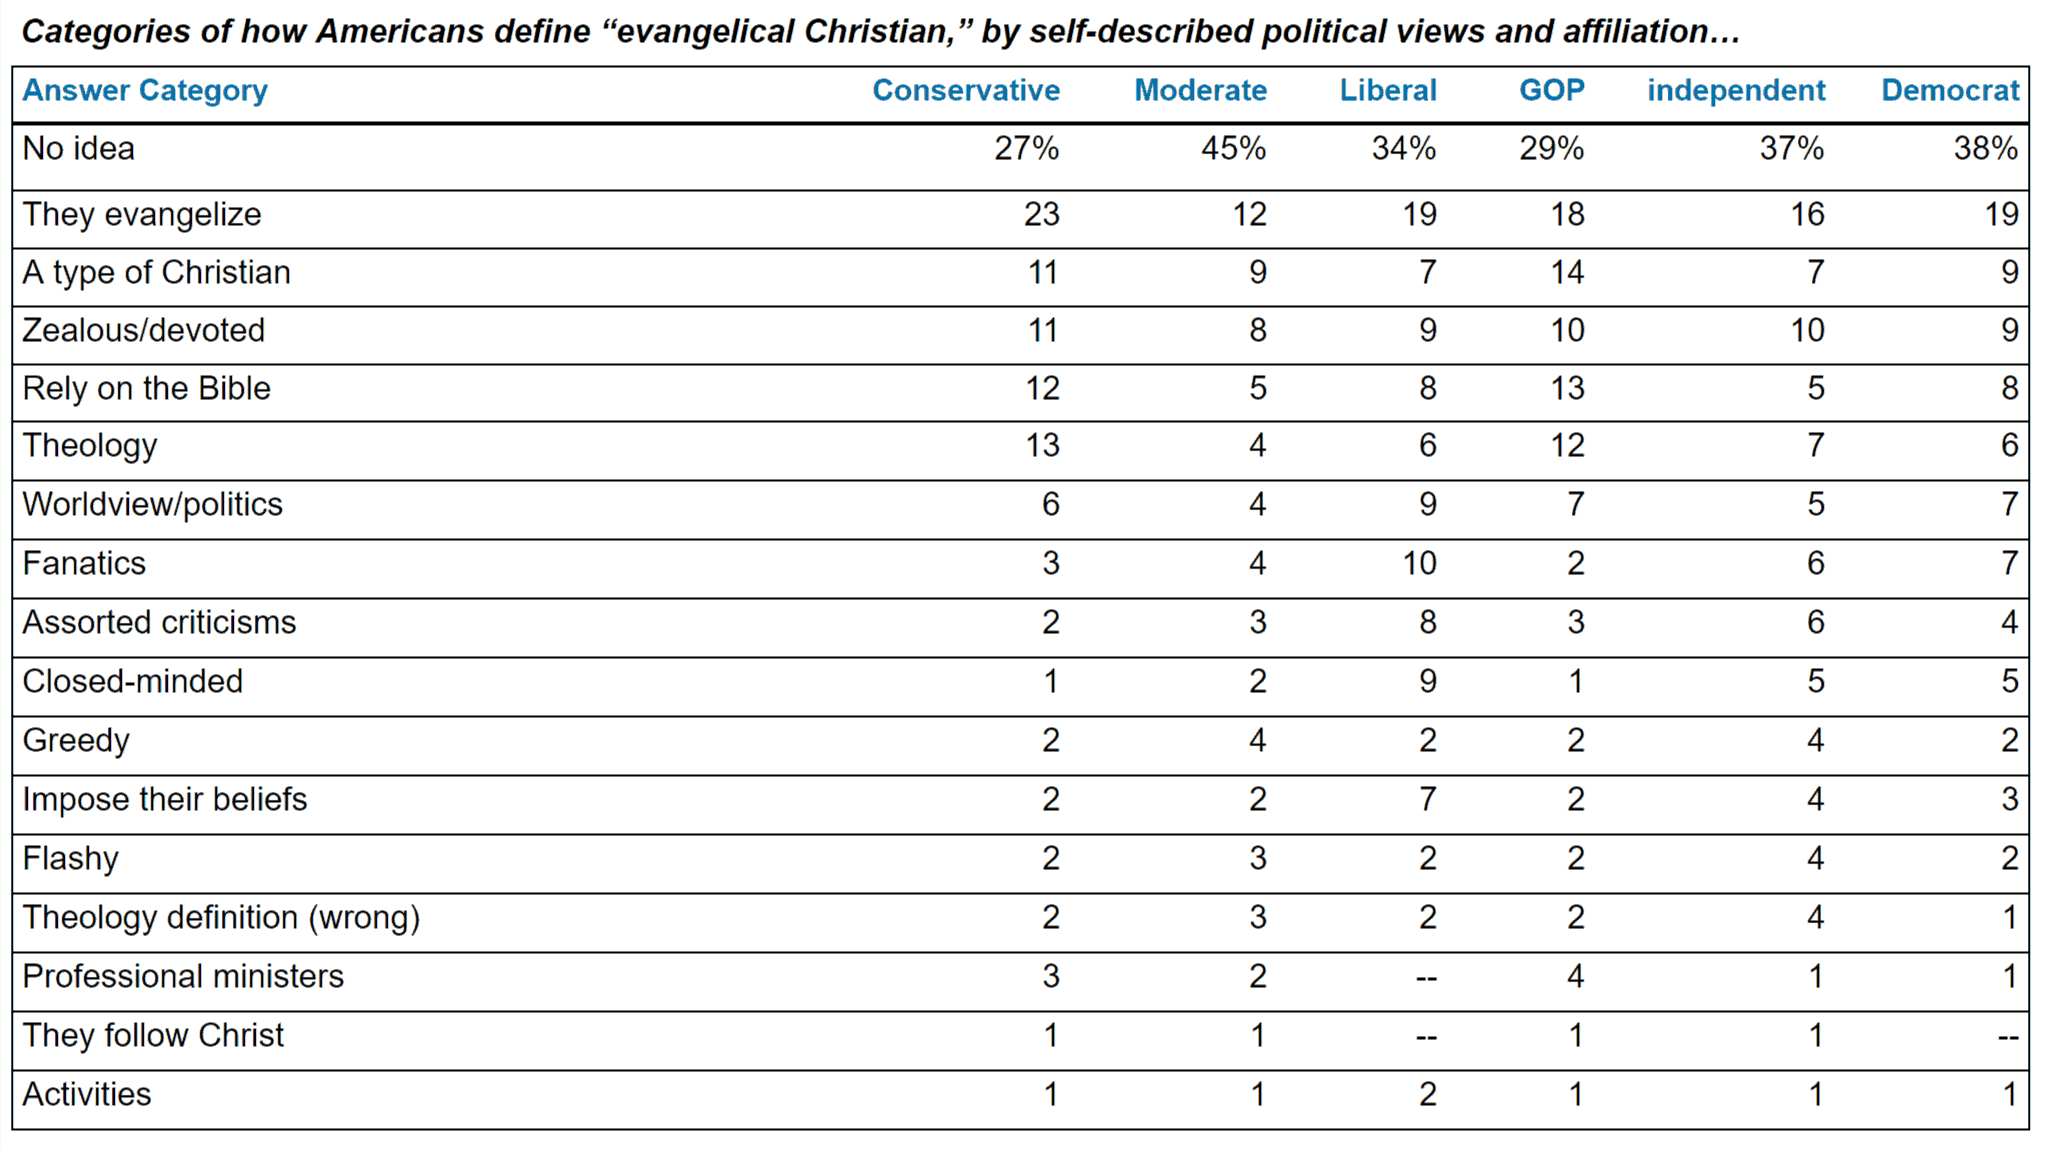 What do Americans think an “evangelical Christian” is?